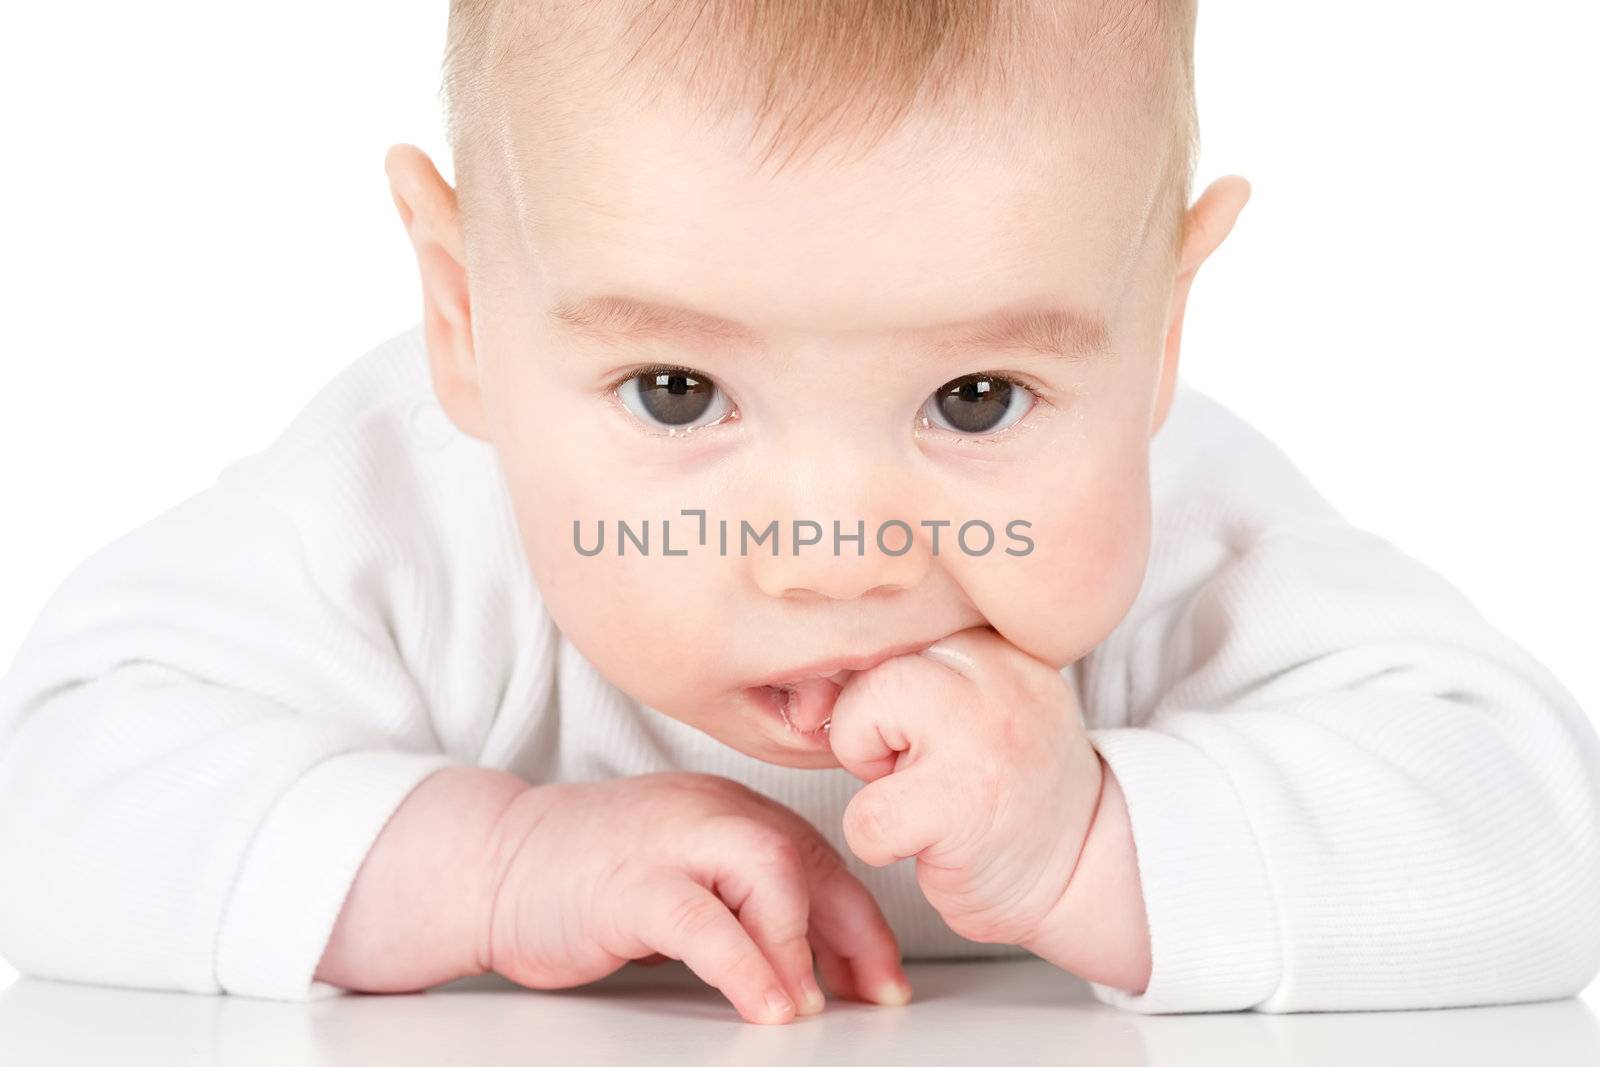 Baby is posing with fingers in his mouth, Isolated on white background